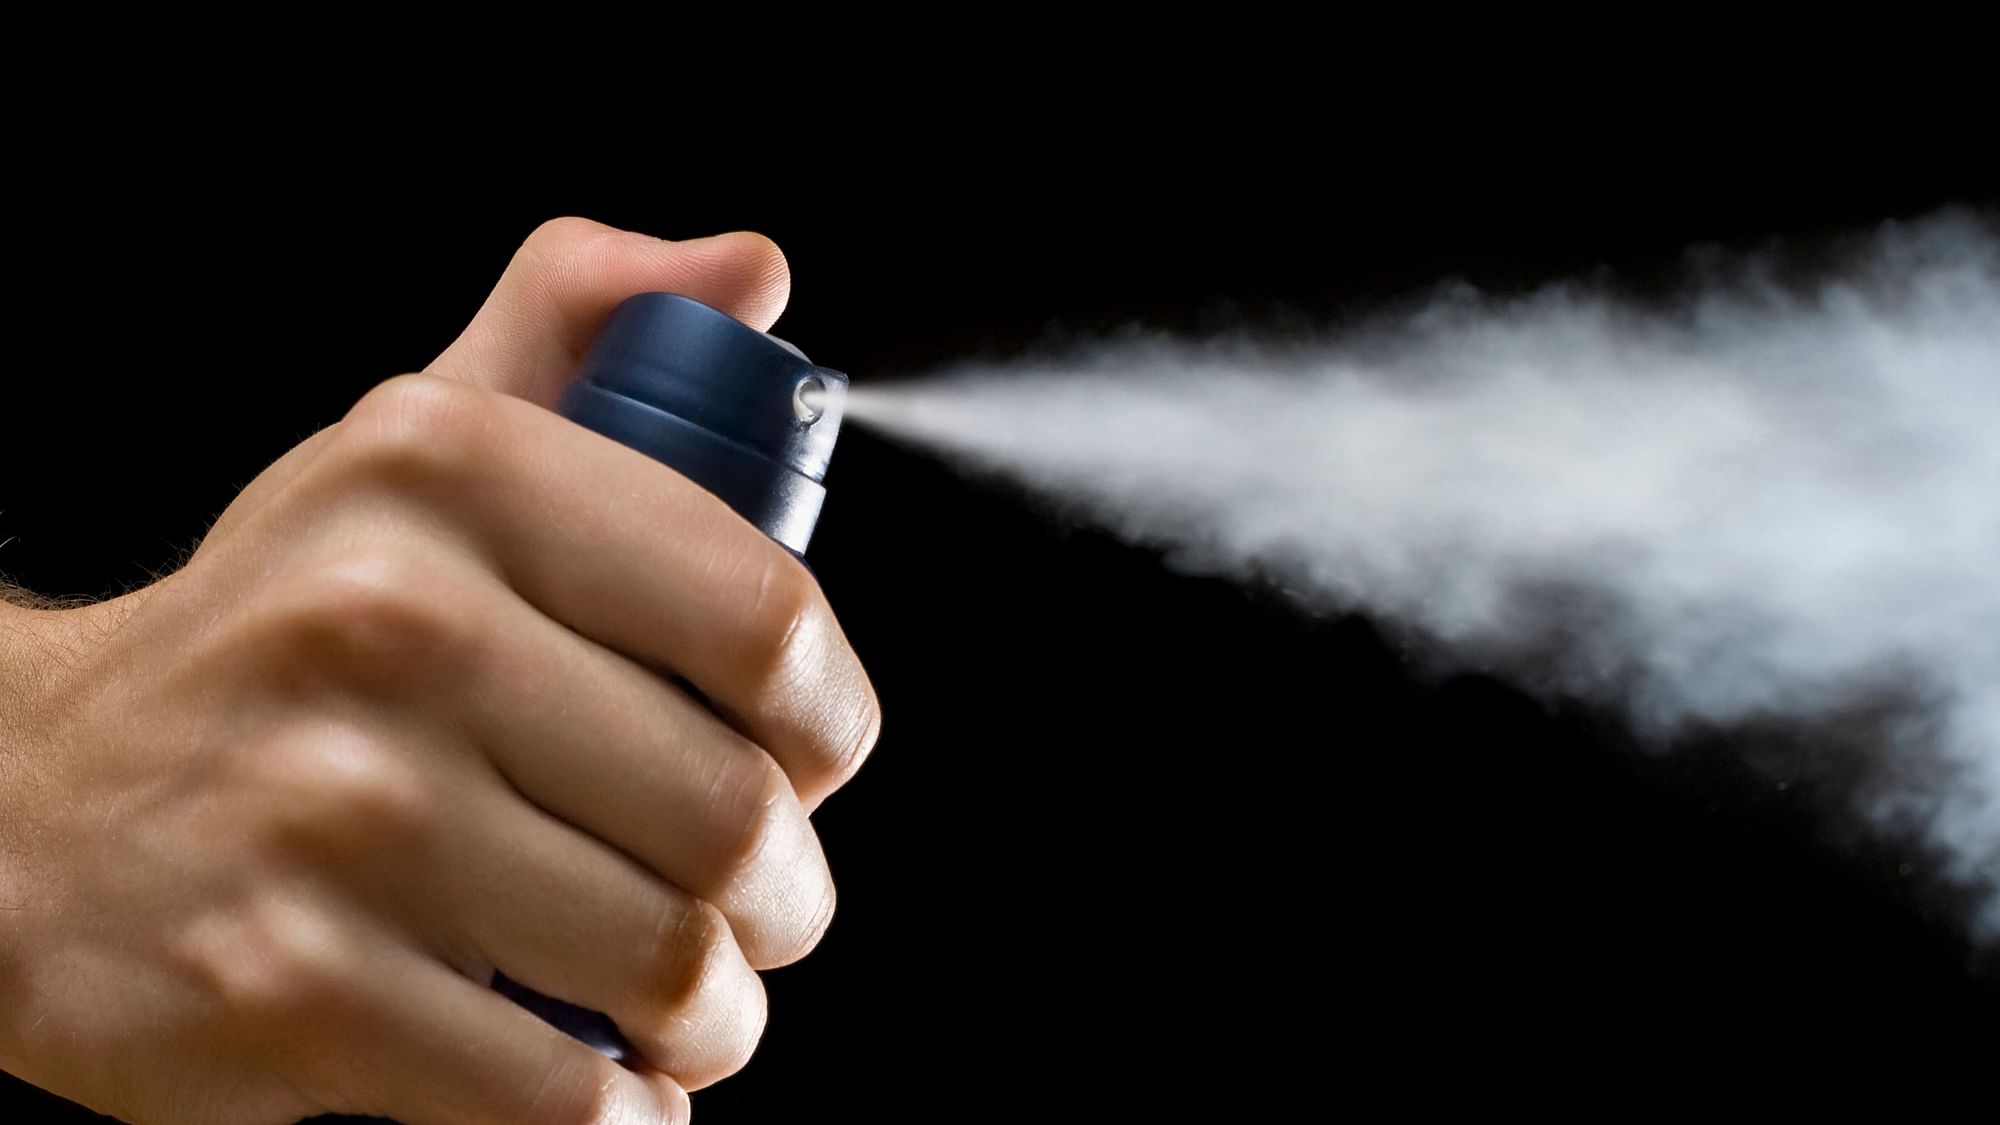 Inhaling chemicals such as a deodorant can lead to serious consequences, even death.&nbsp;